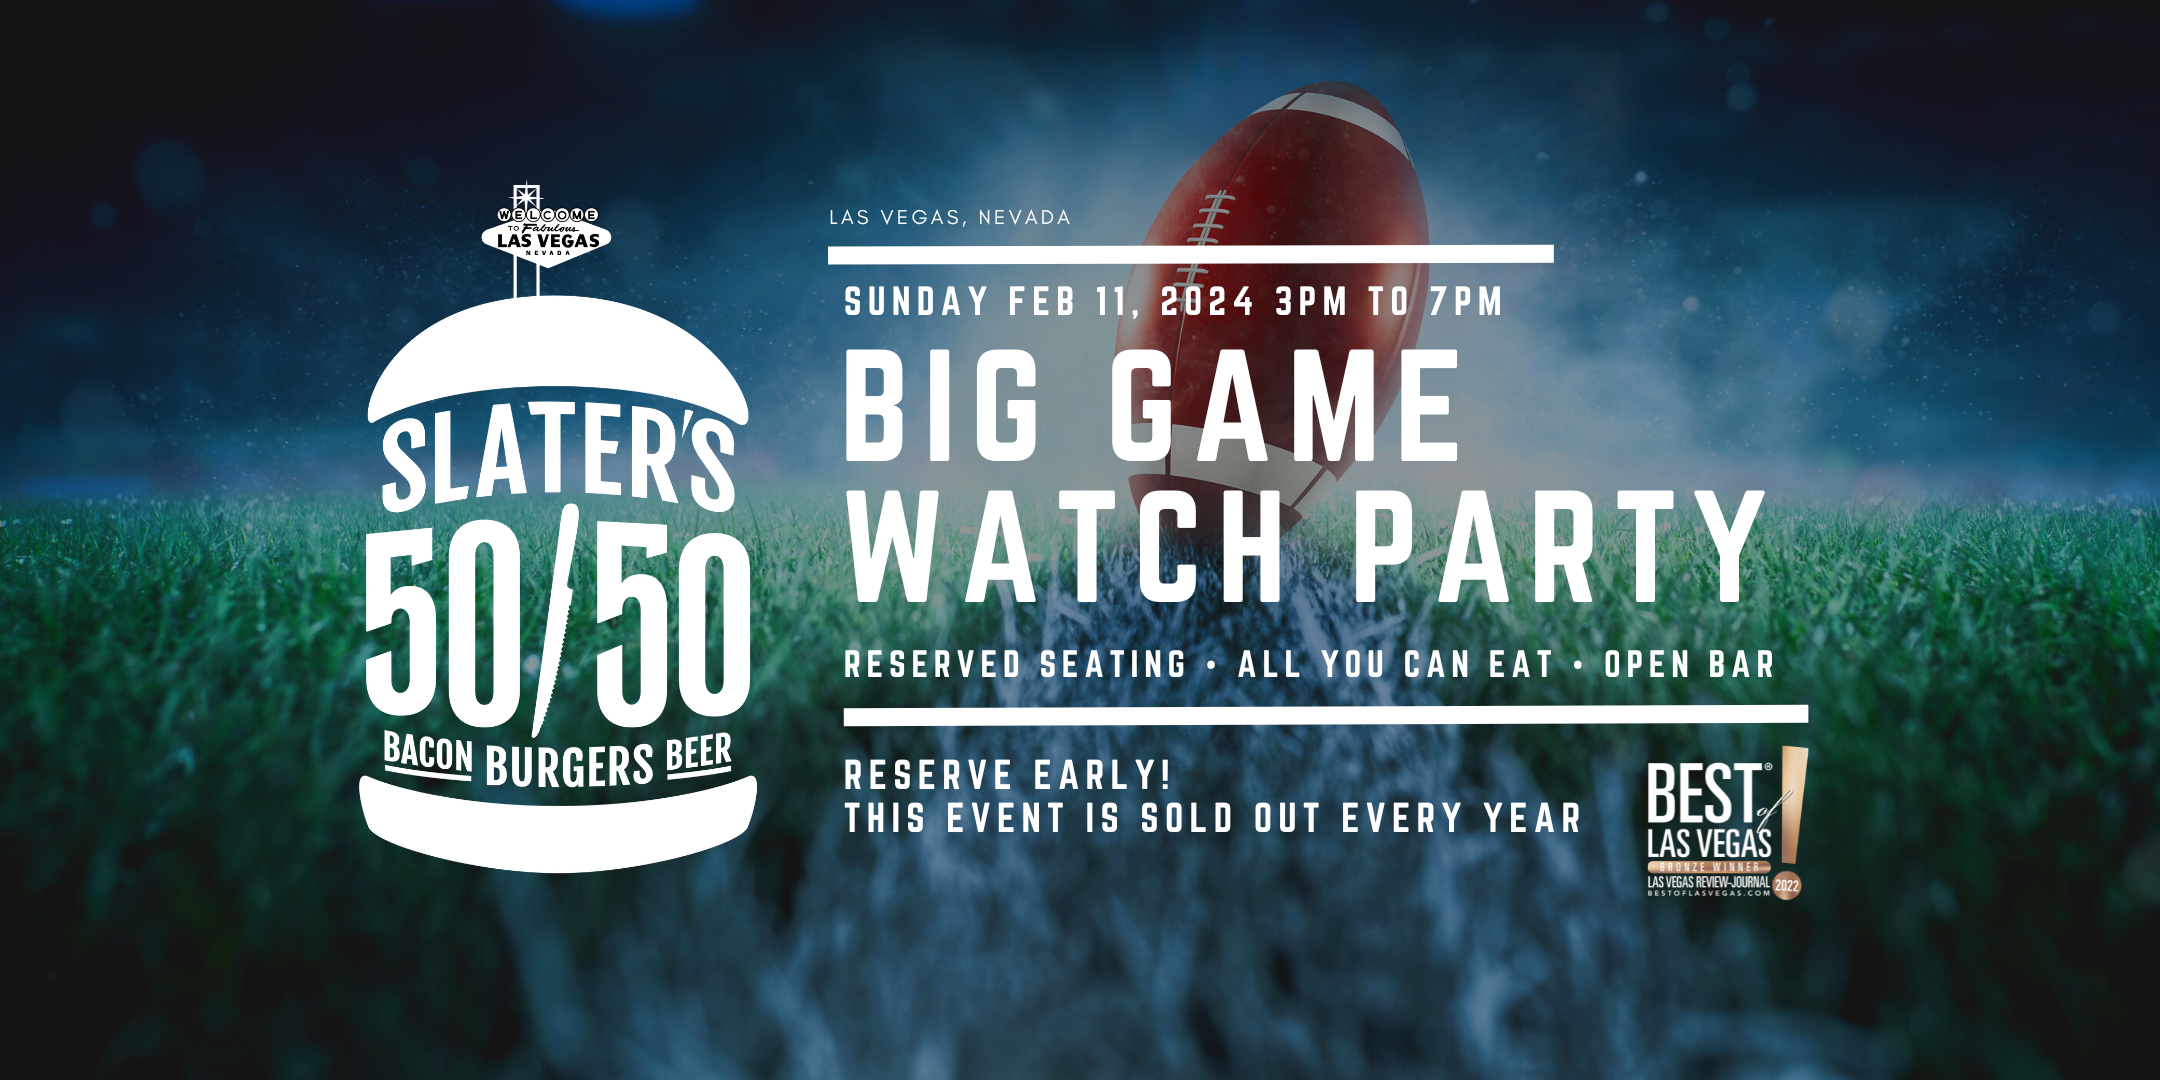 The Big Game Watch Party at Slater’s 50/50 – Lake Mead Location